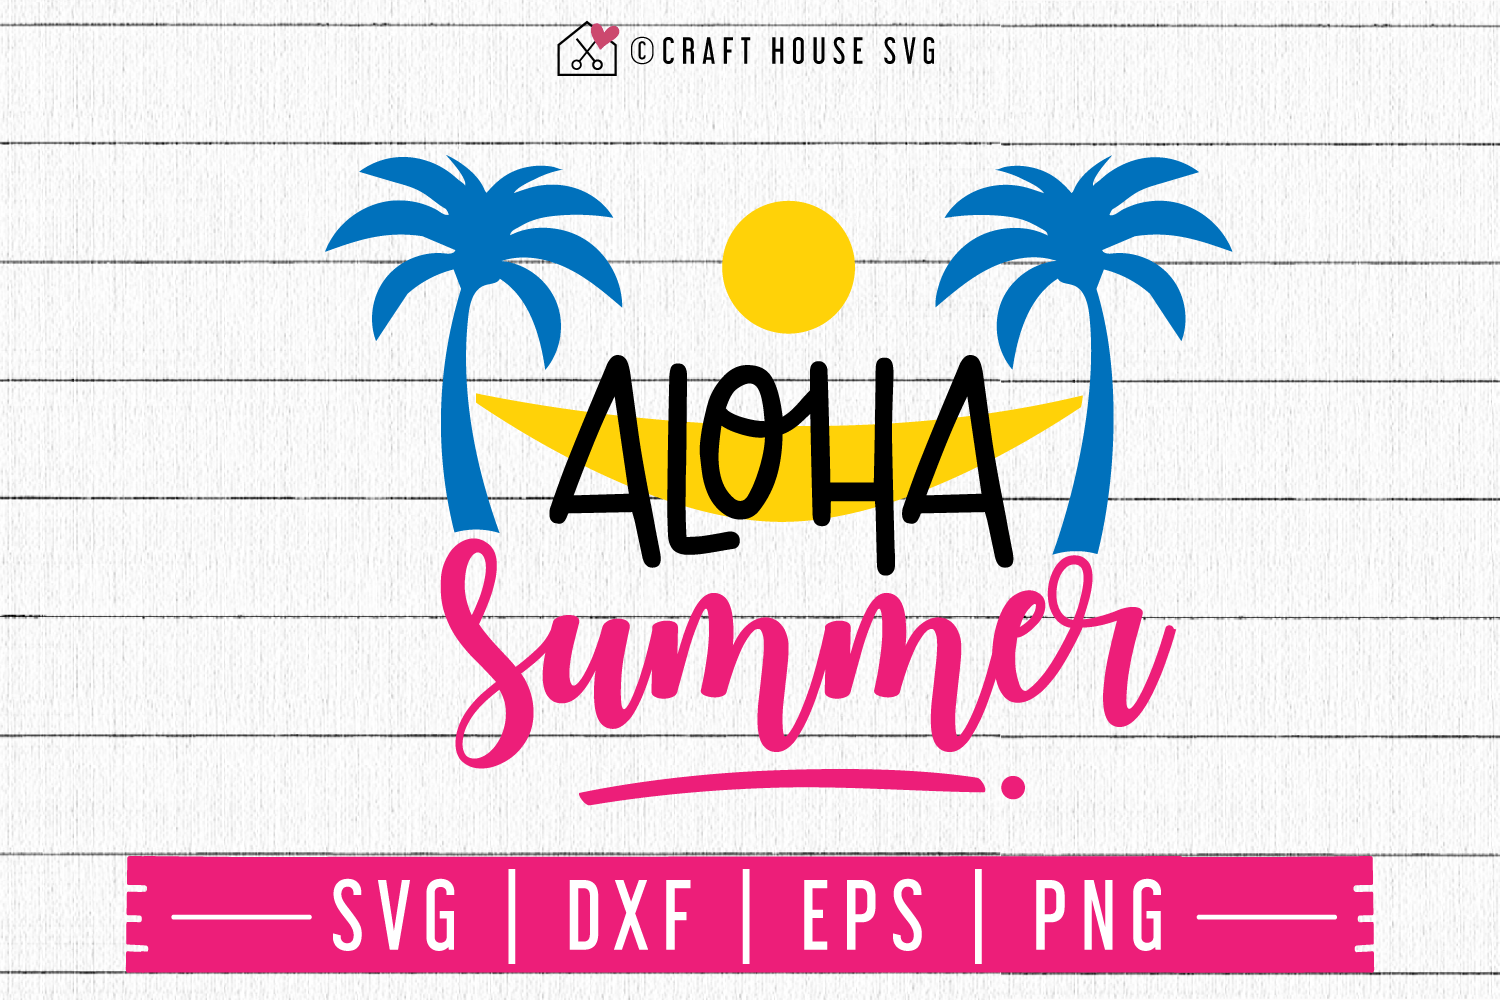 Aloha summer SVG | M48F | A Summer SVG cut file Craft House SVG - SVG files for Cricut and Silhouette